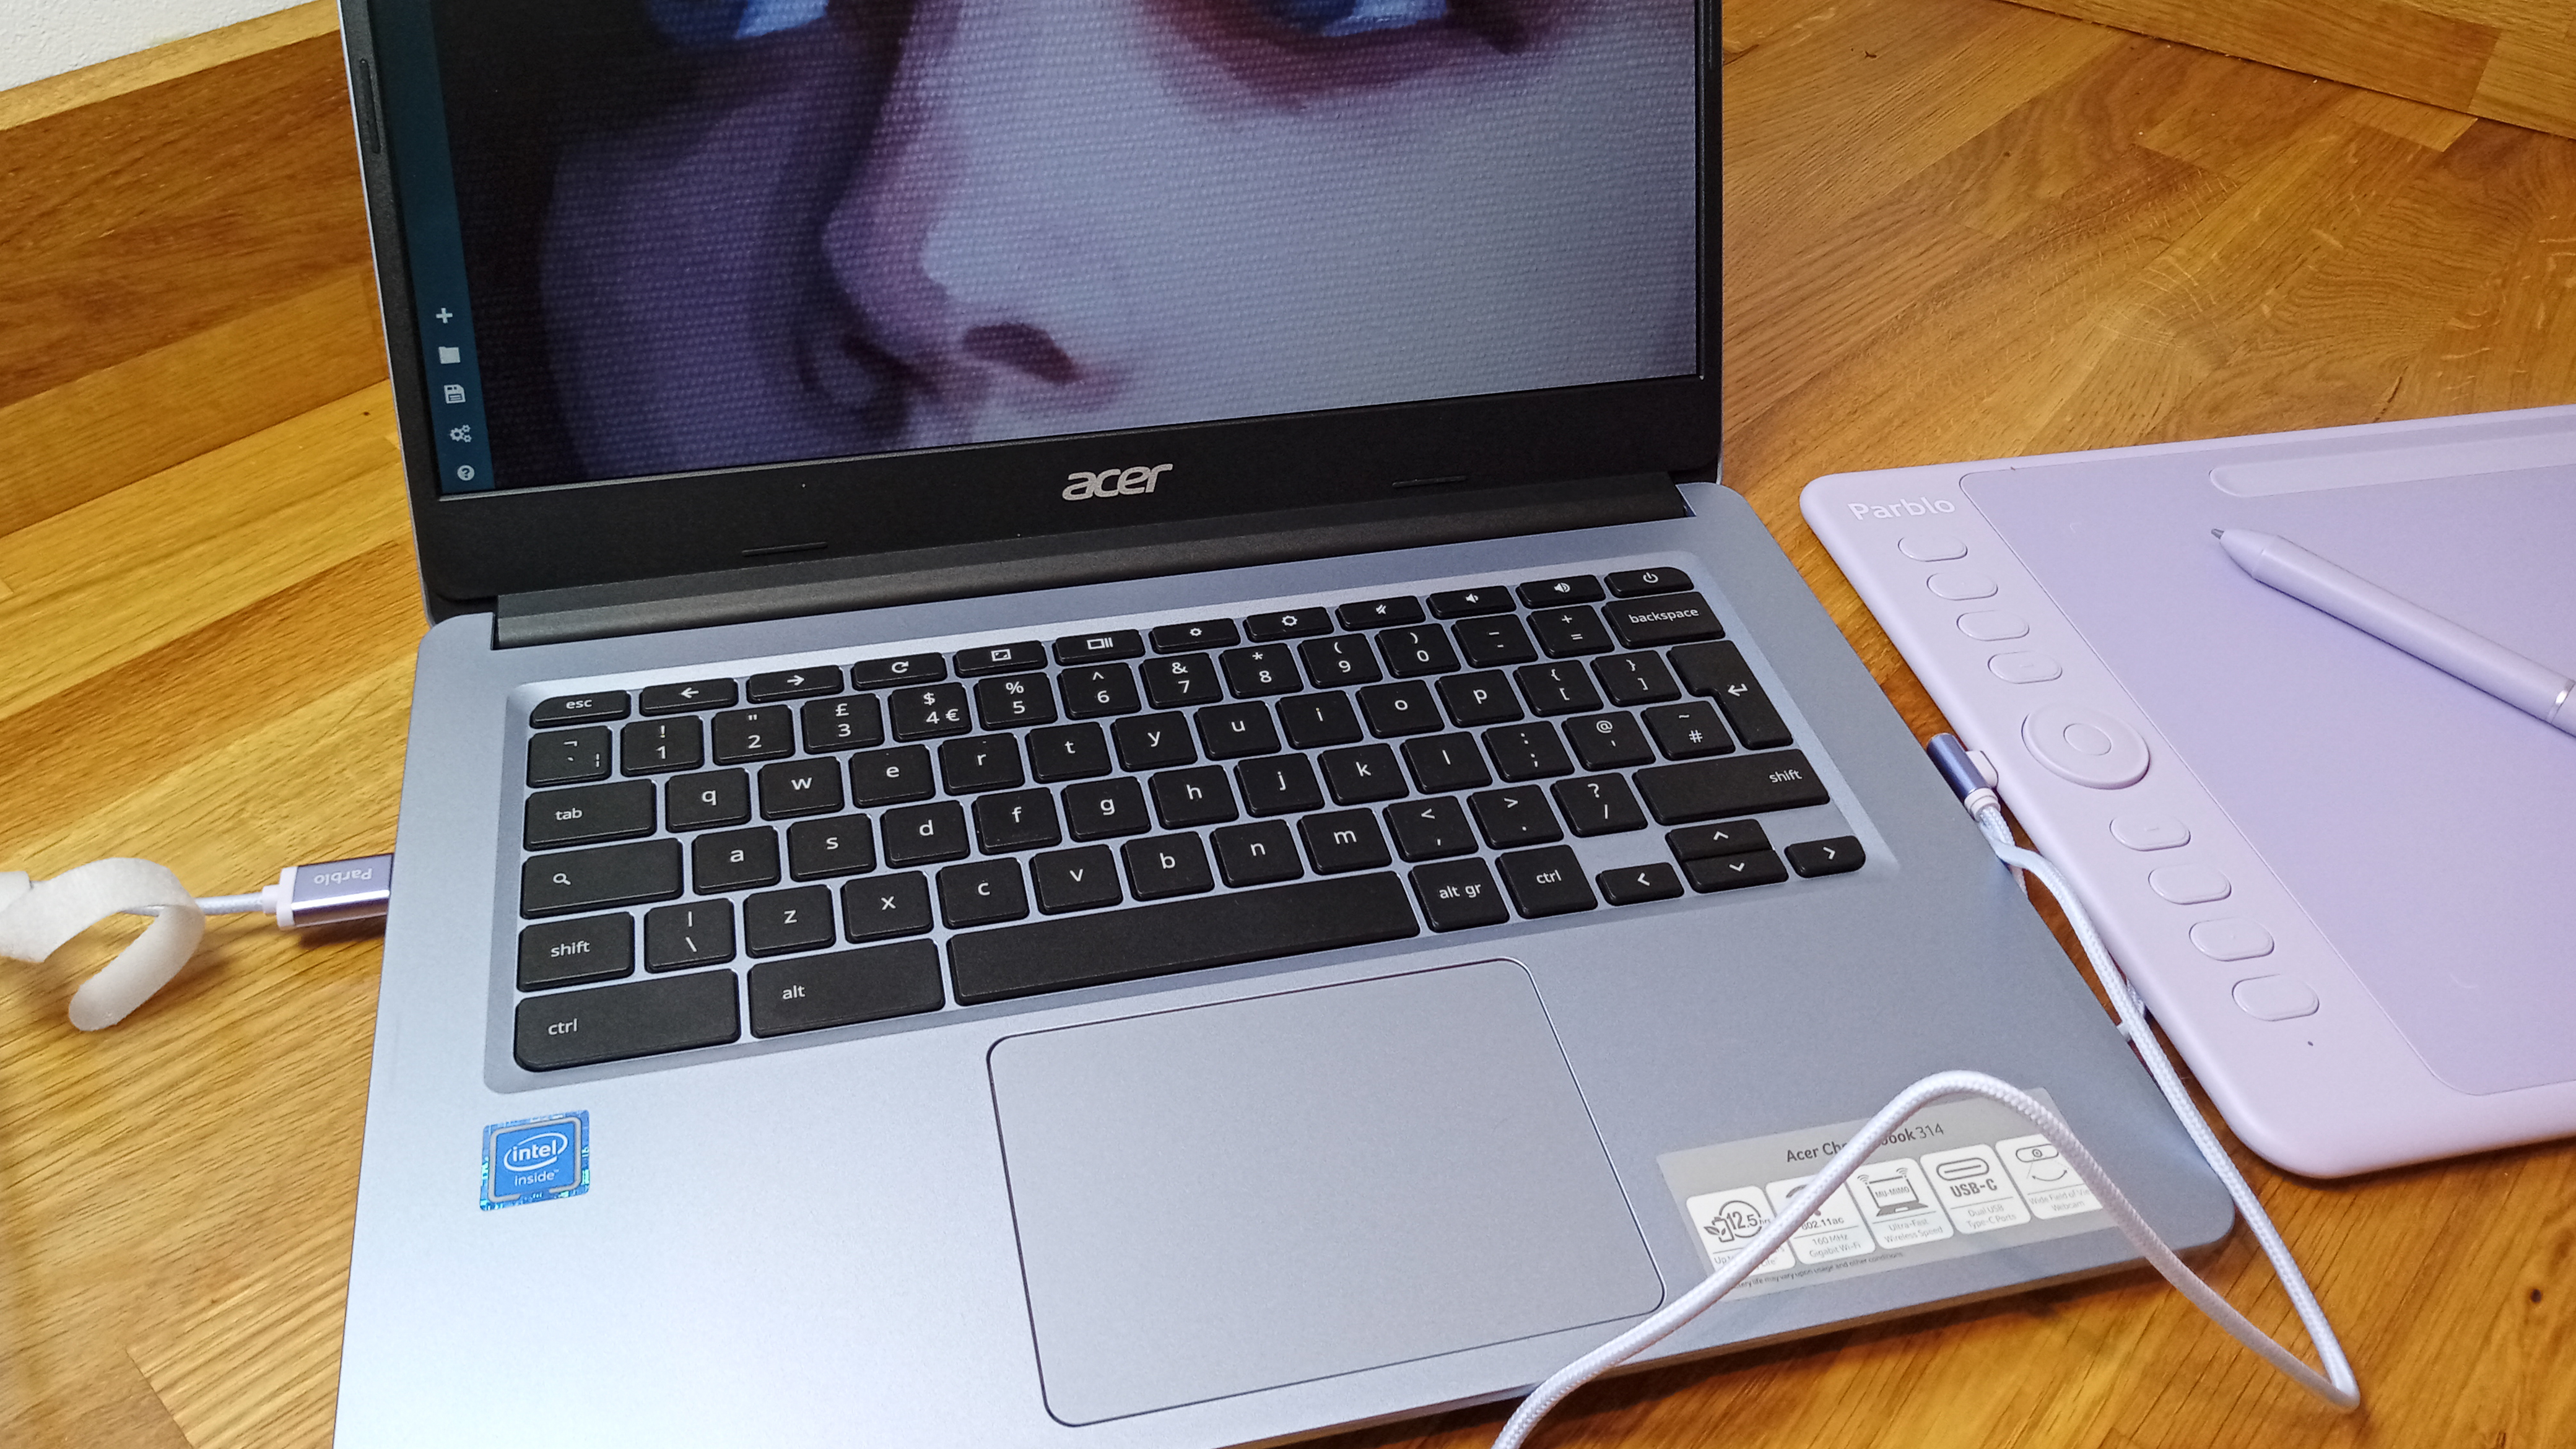 Acer 314, one of the best Chromebooks for students, placed on a wooden table with a drawing board